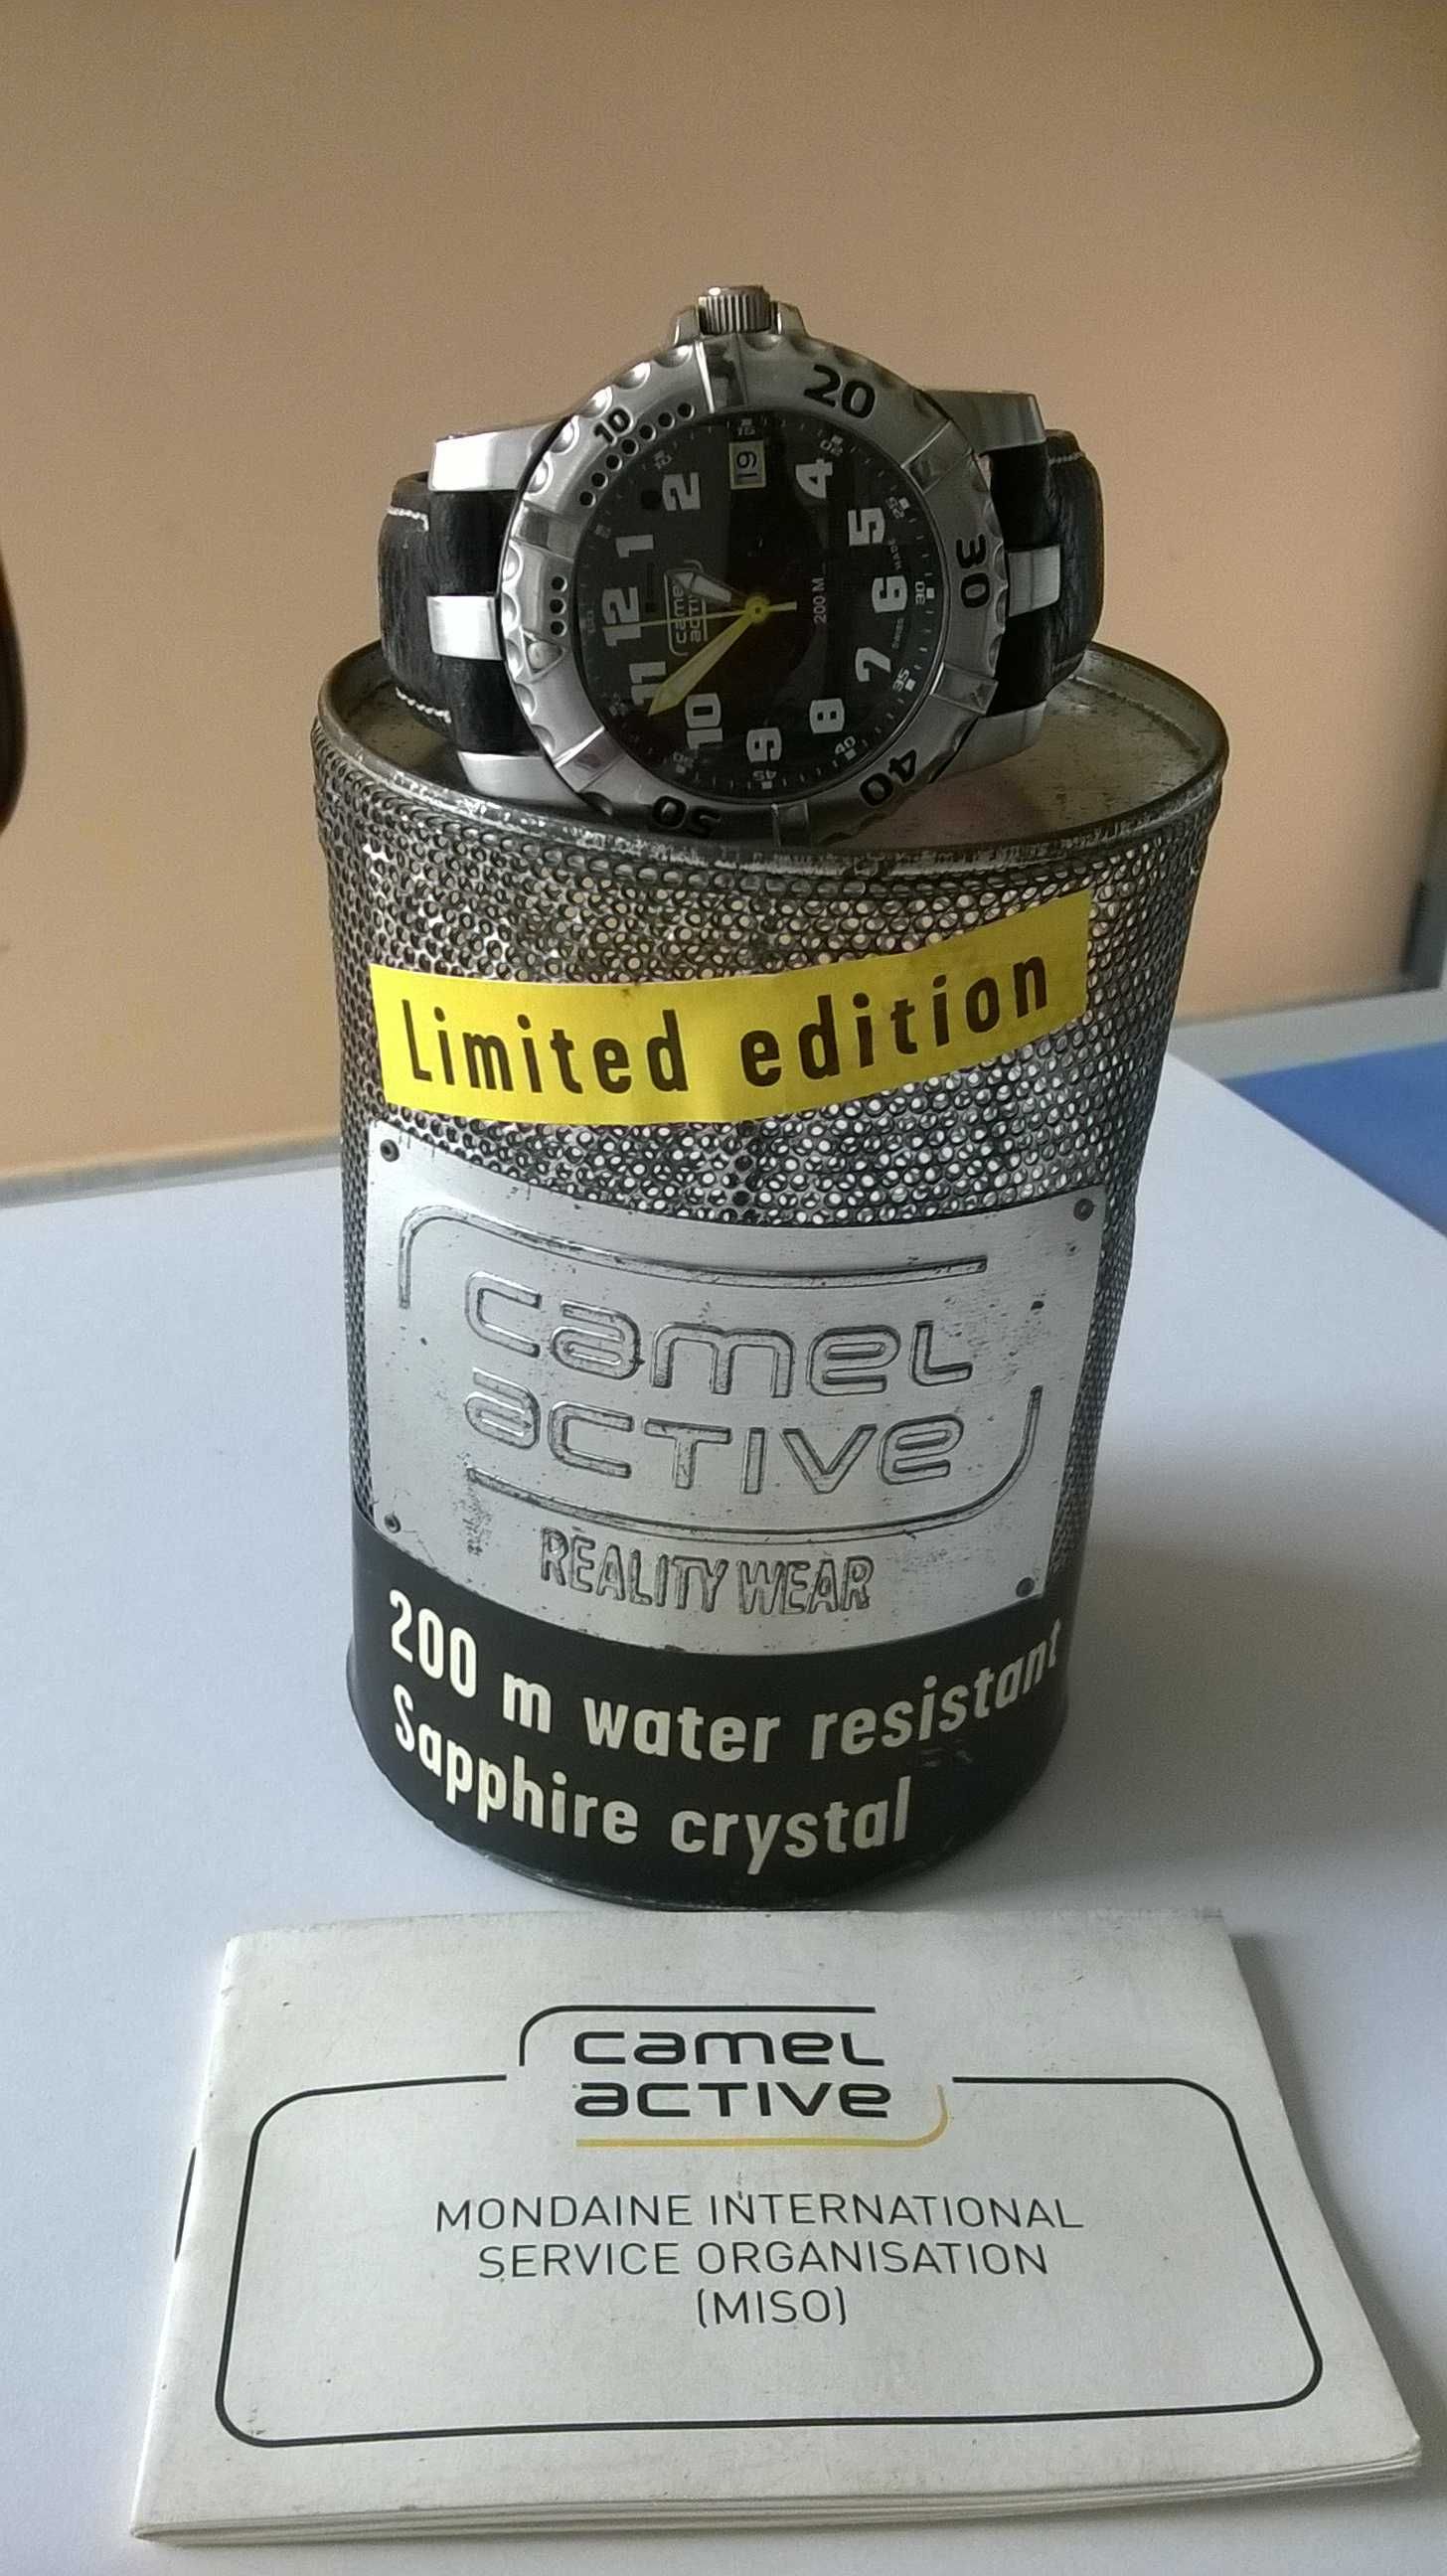 CAMEL active Shapphire Crystal